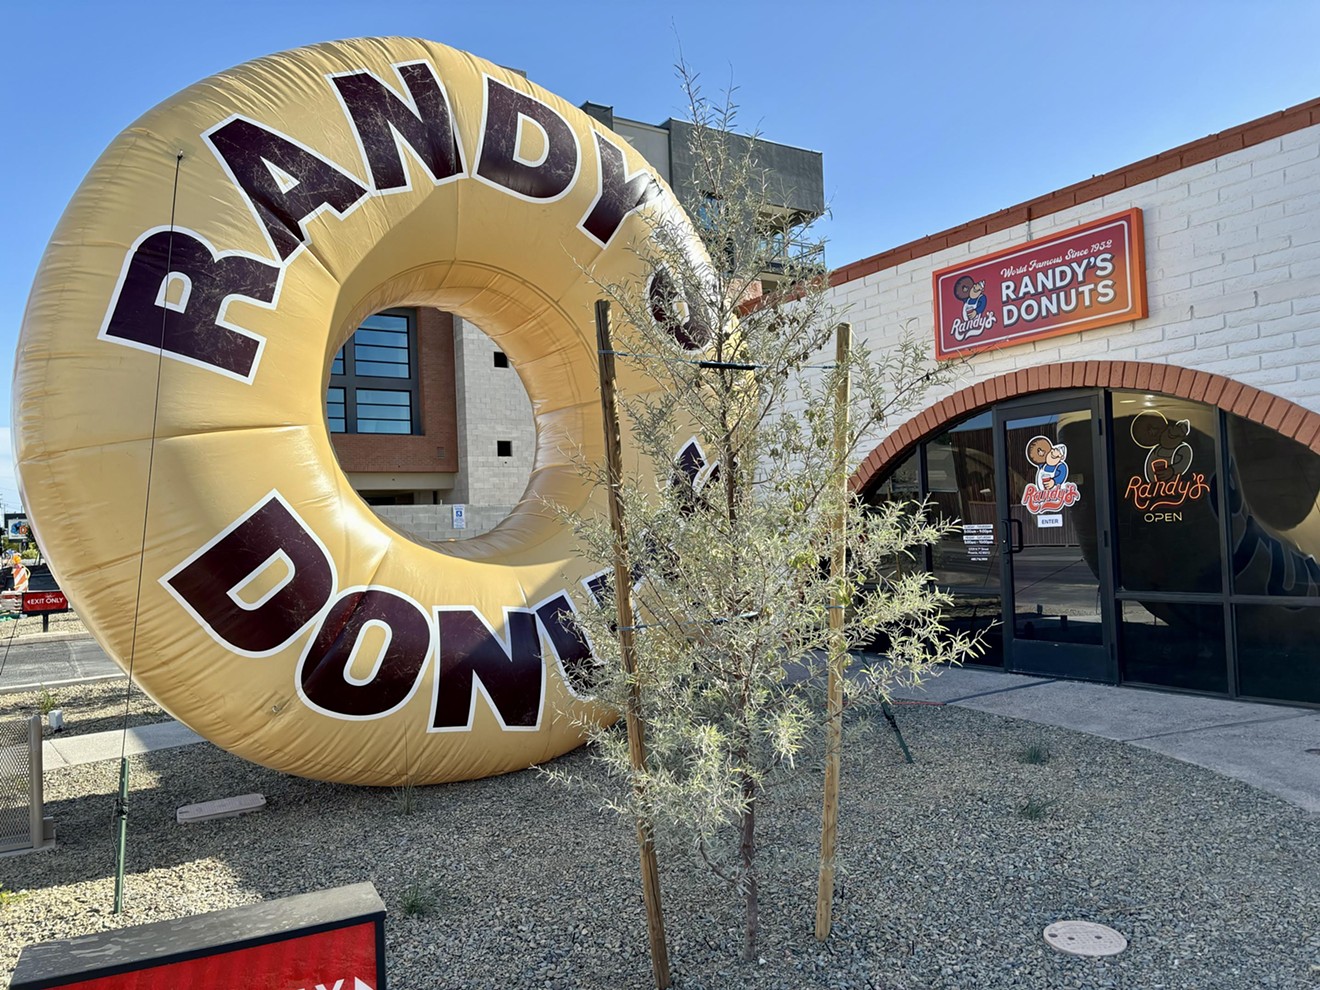 Randy's Donuts opened its first Phoenix location at 5 a.m. on Thursday.